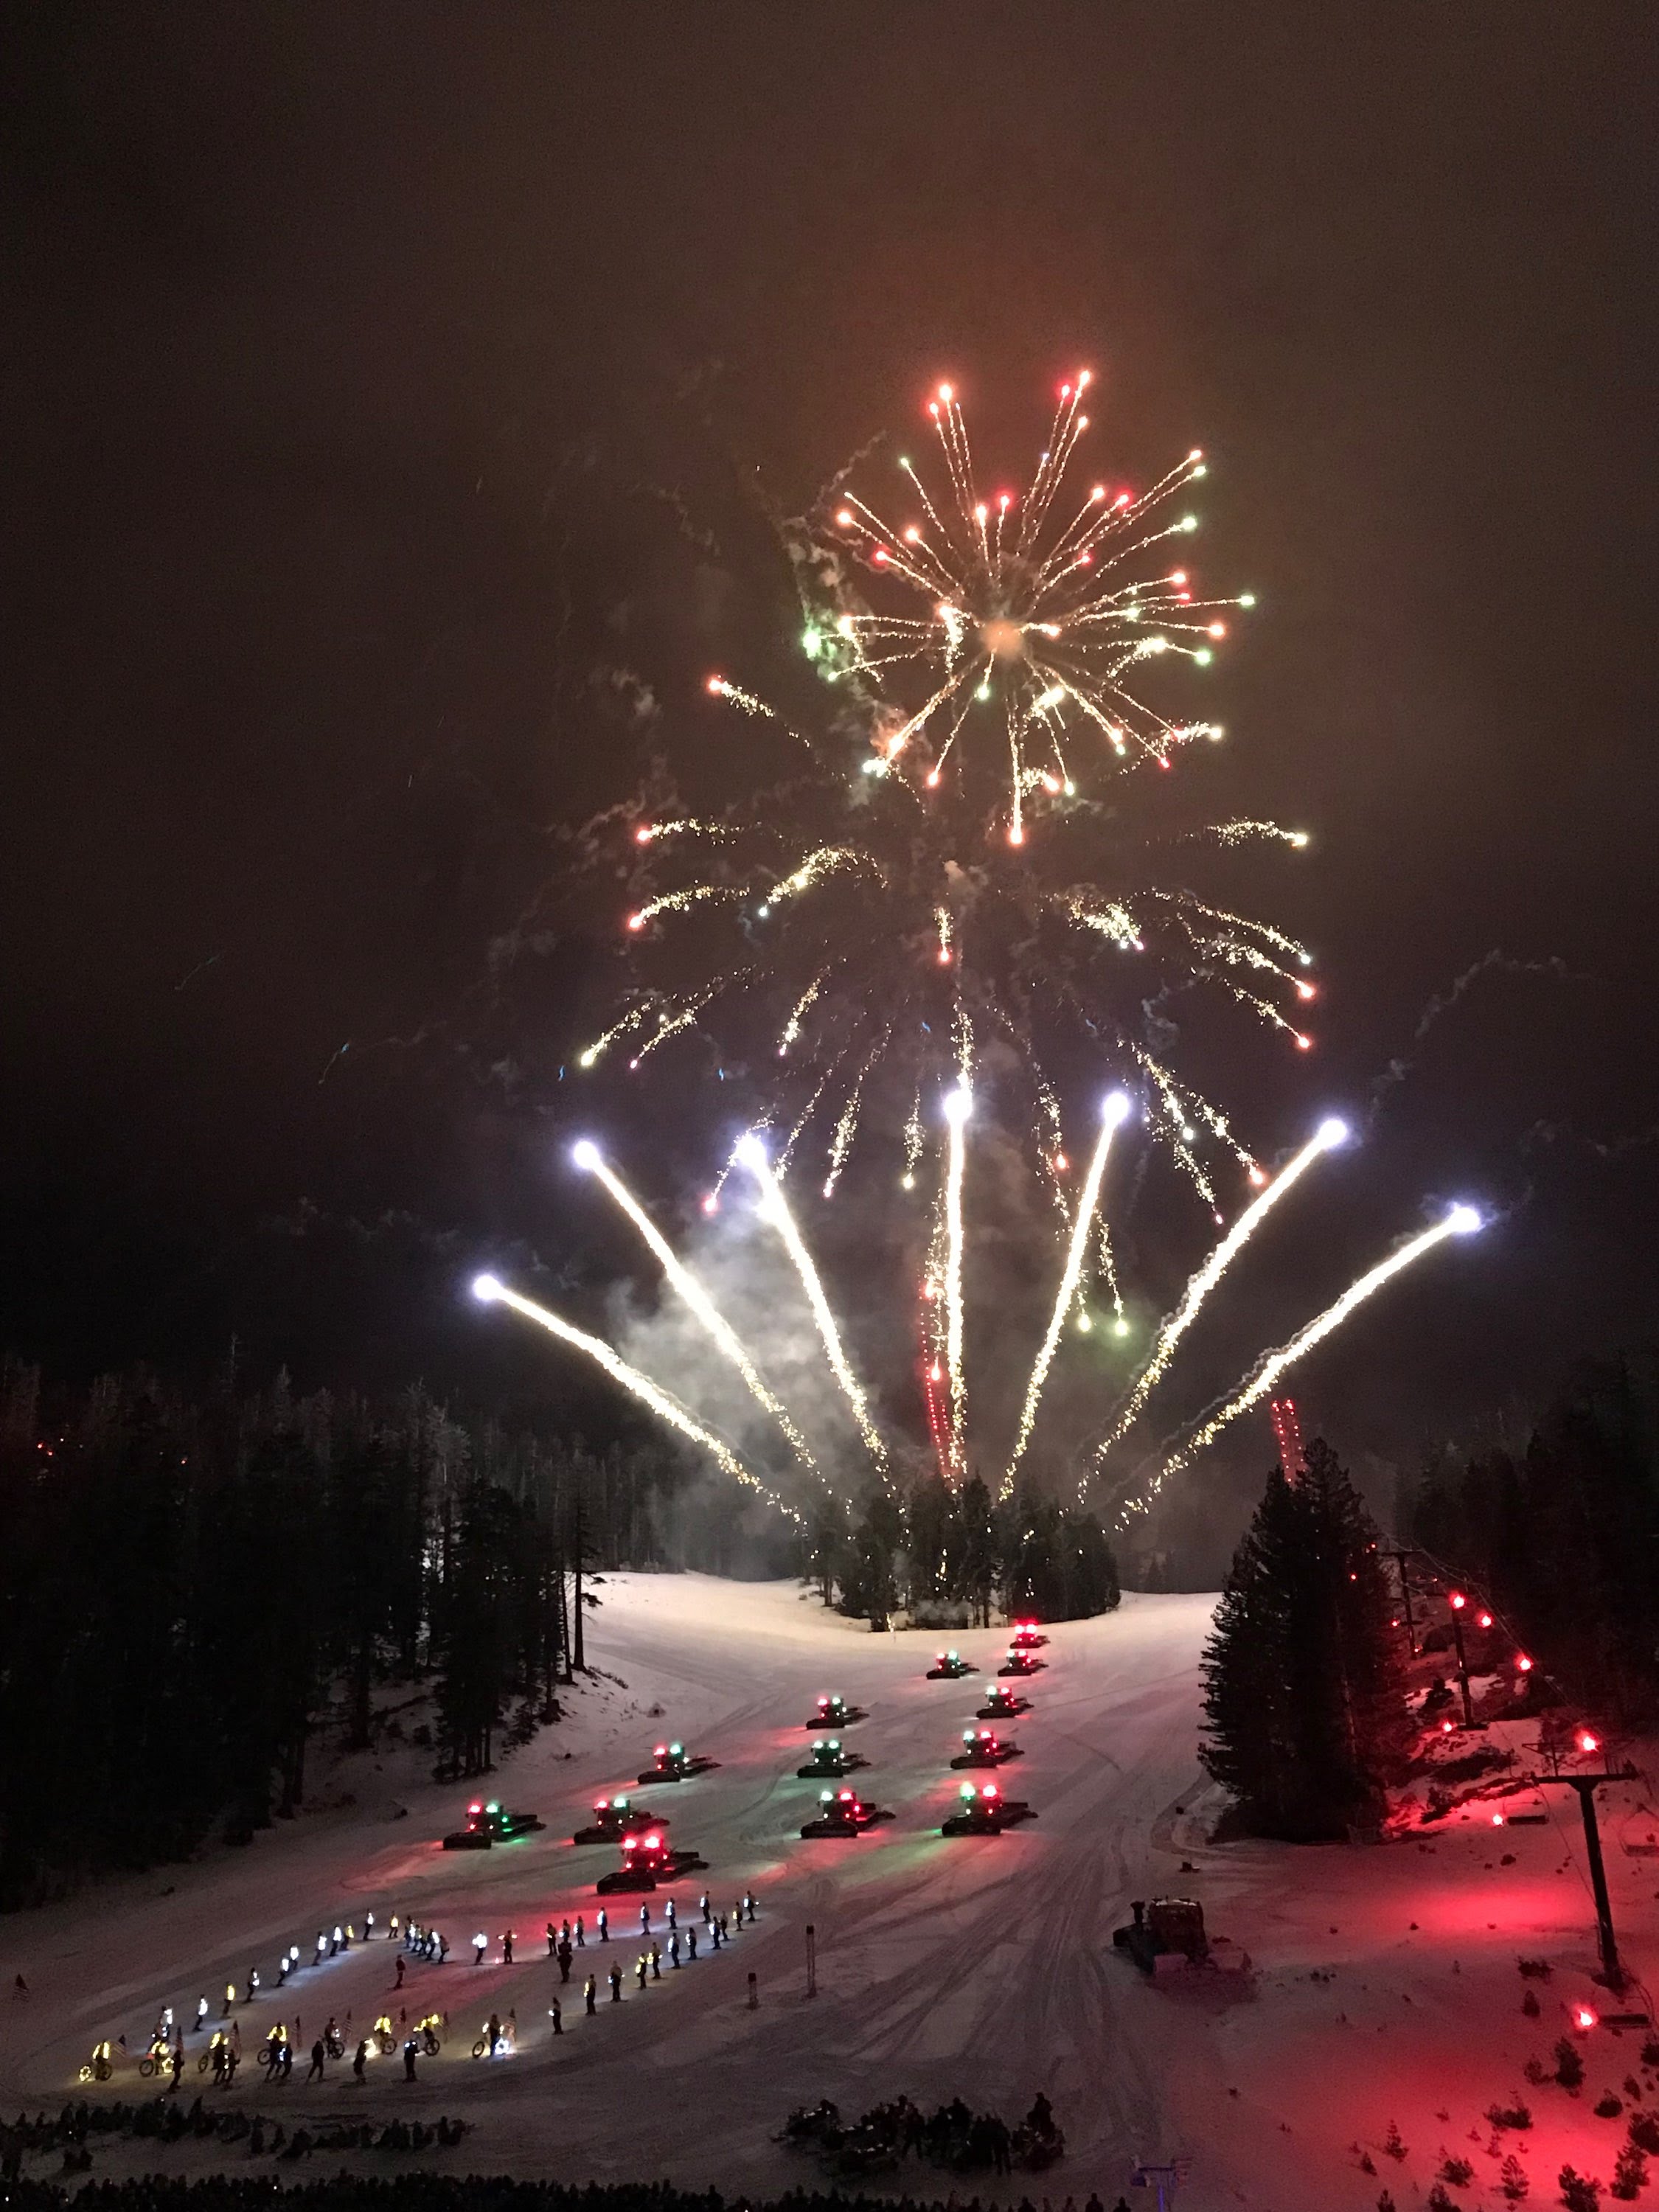 Fireworks over the slopes of Mammoth.